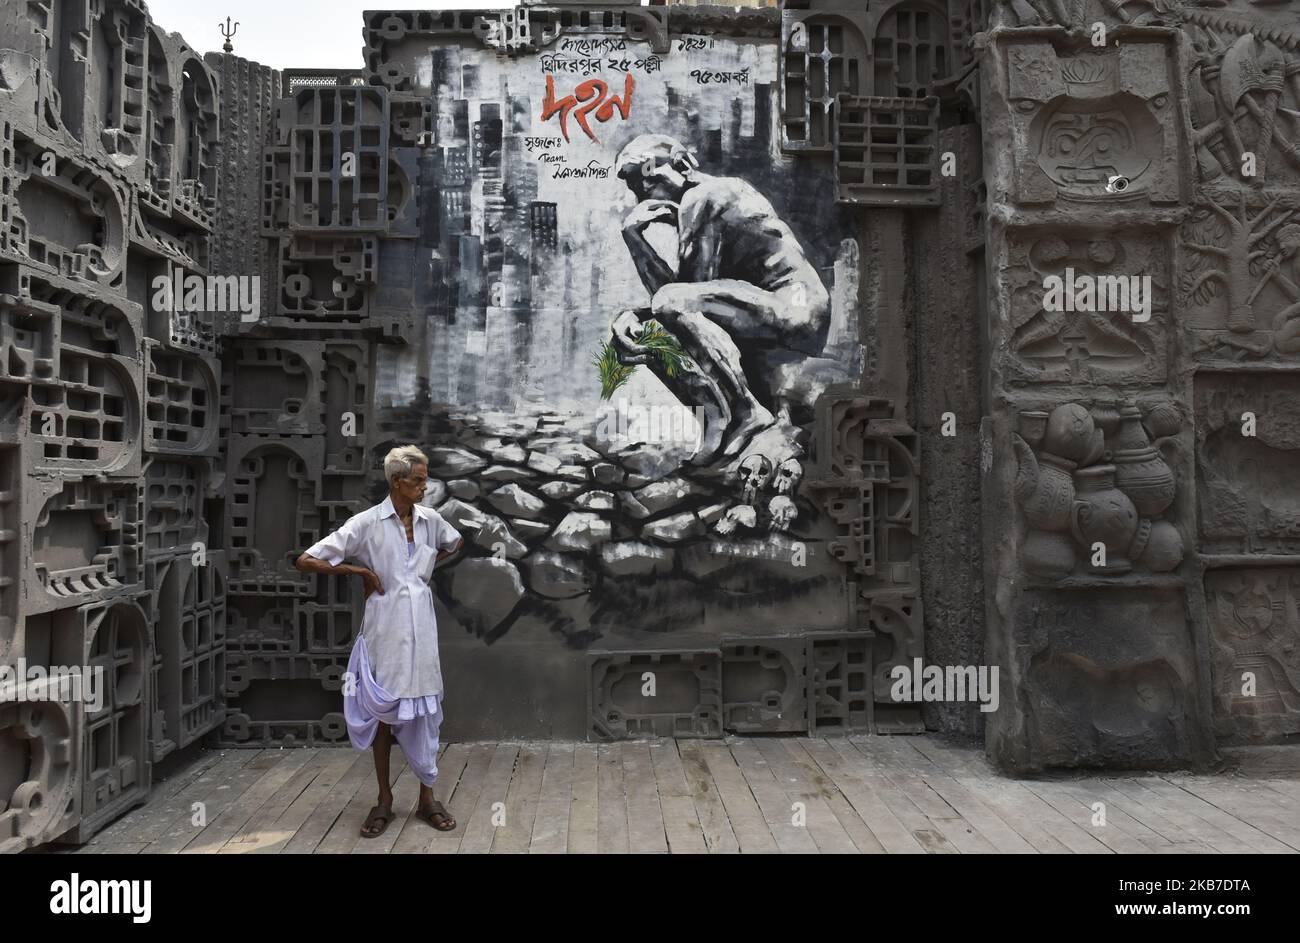 A man stands in front of a painting of a Durga puja pandal in Kolkata, India, 02 October, 2019. The five day Durga Puja festival commemorates the slaying of demon king Mahishasura by Hindu goddess Durga, marking the triumph of good over evil, begins on 04 October, this year. (Photo by Indranil Aditya/NurPhoto) Stock Photo